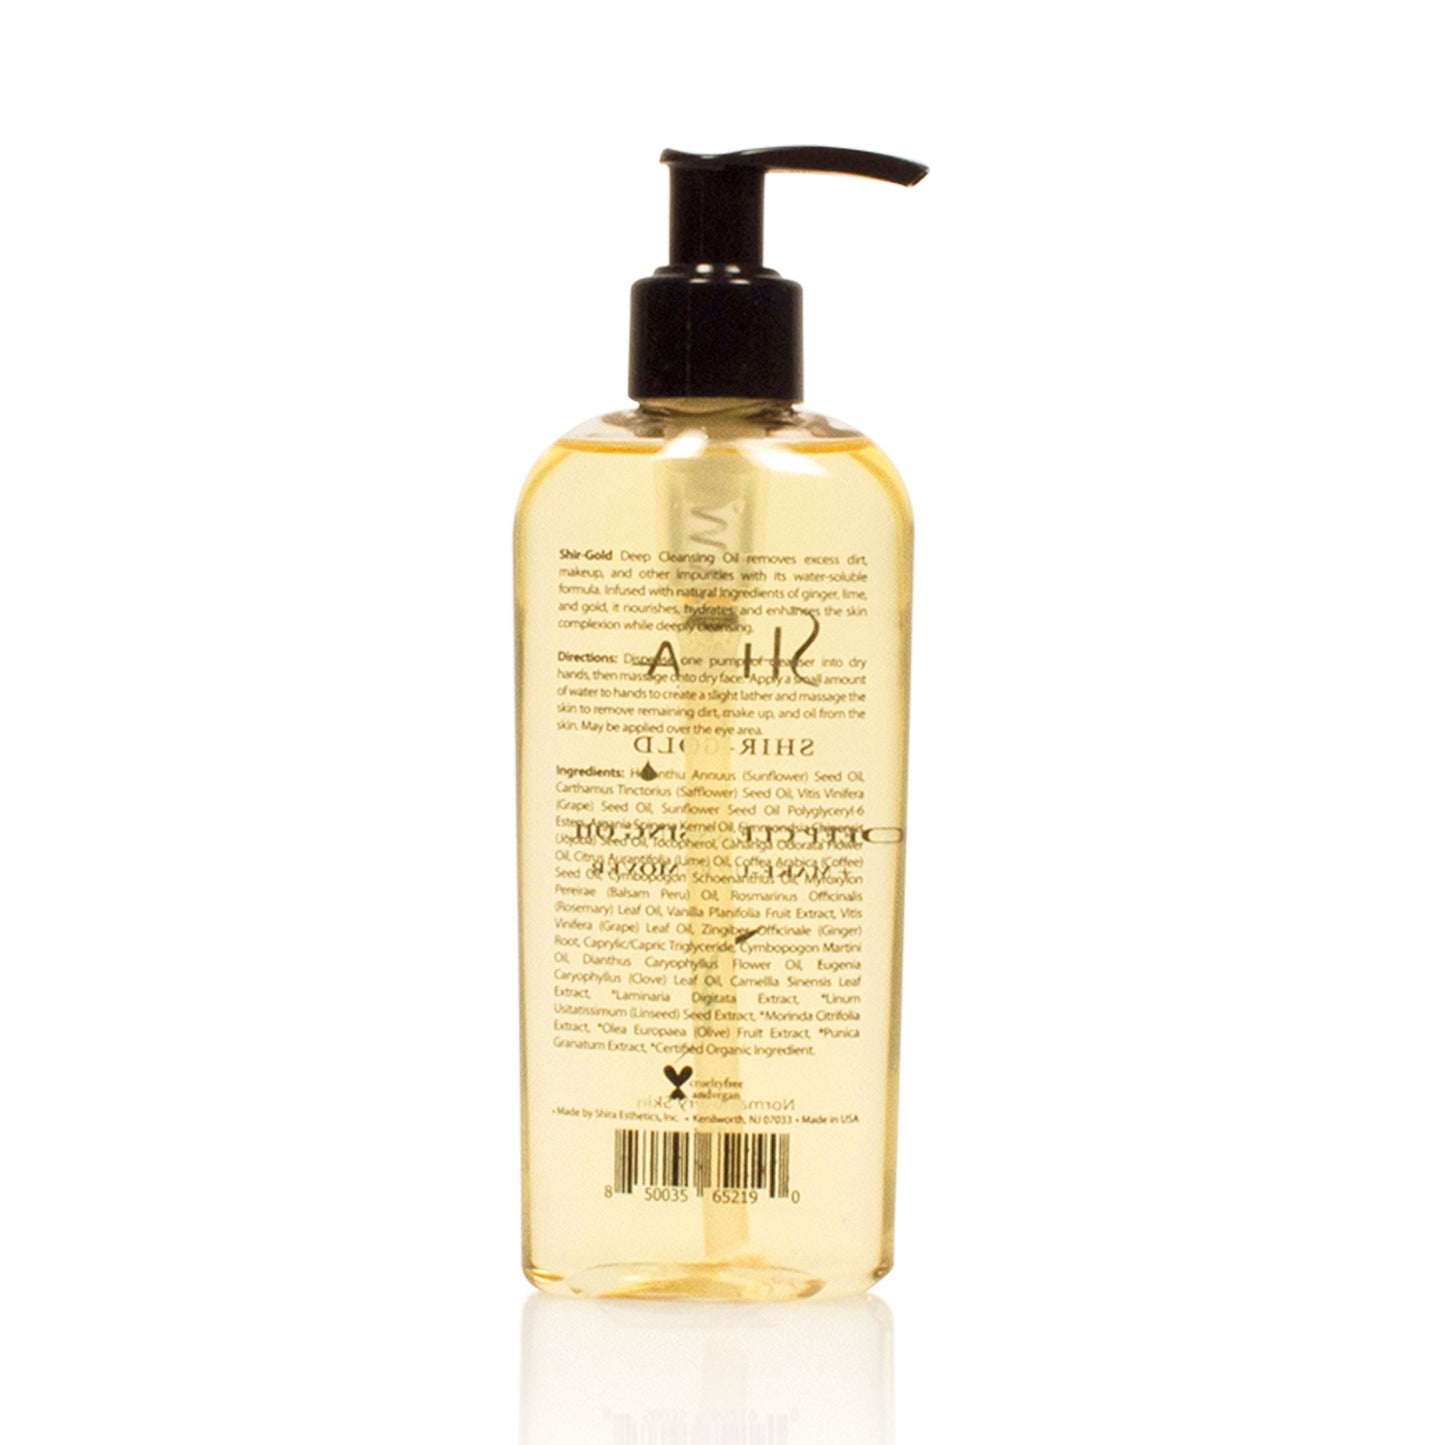 SHIR-GOLD DEEP CLEANSING OIL & MAKEUP REMOVER